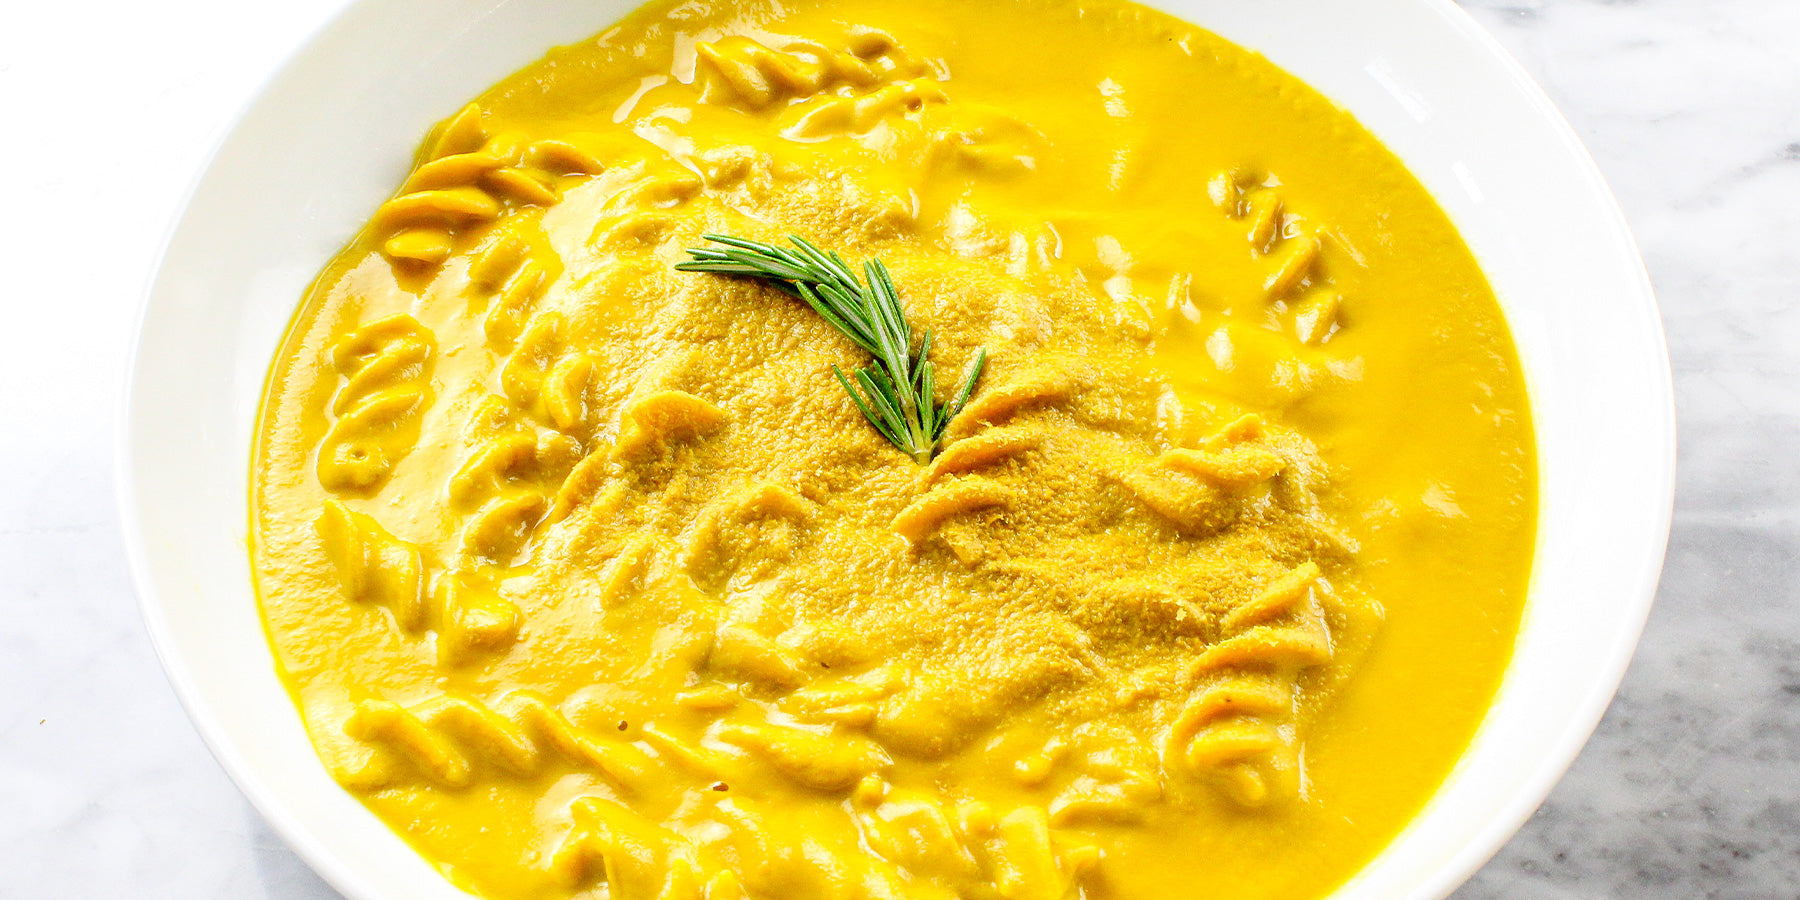 White Corn Fusilloni with Turmeric and Sarawak Pepper in a Creamy Carrot Soup with Rosemary